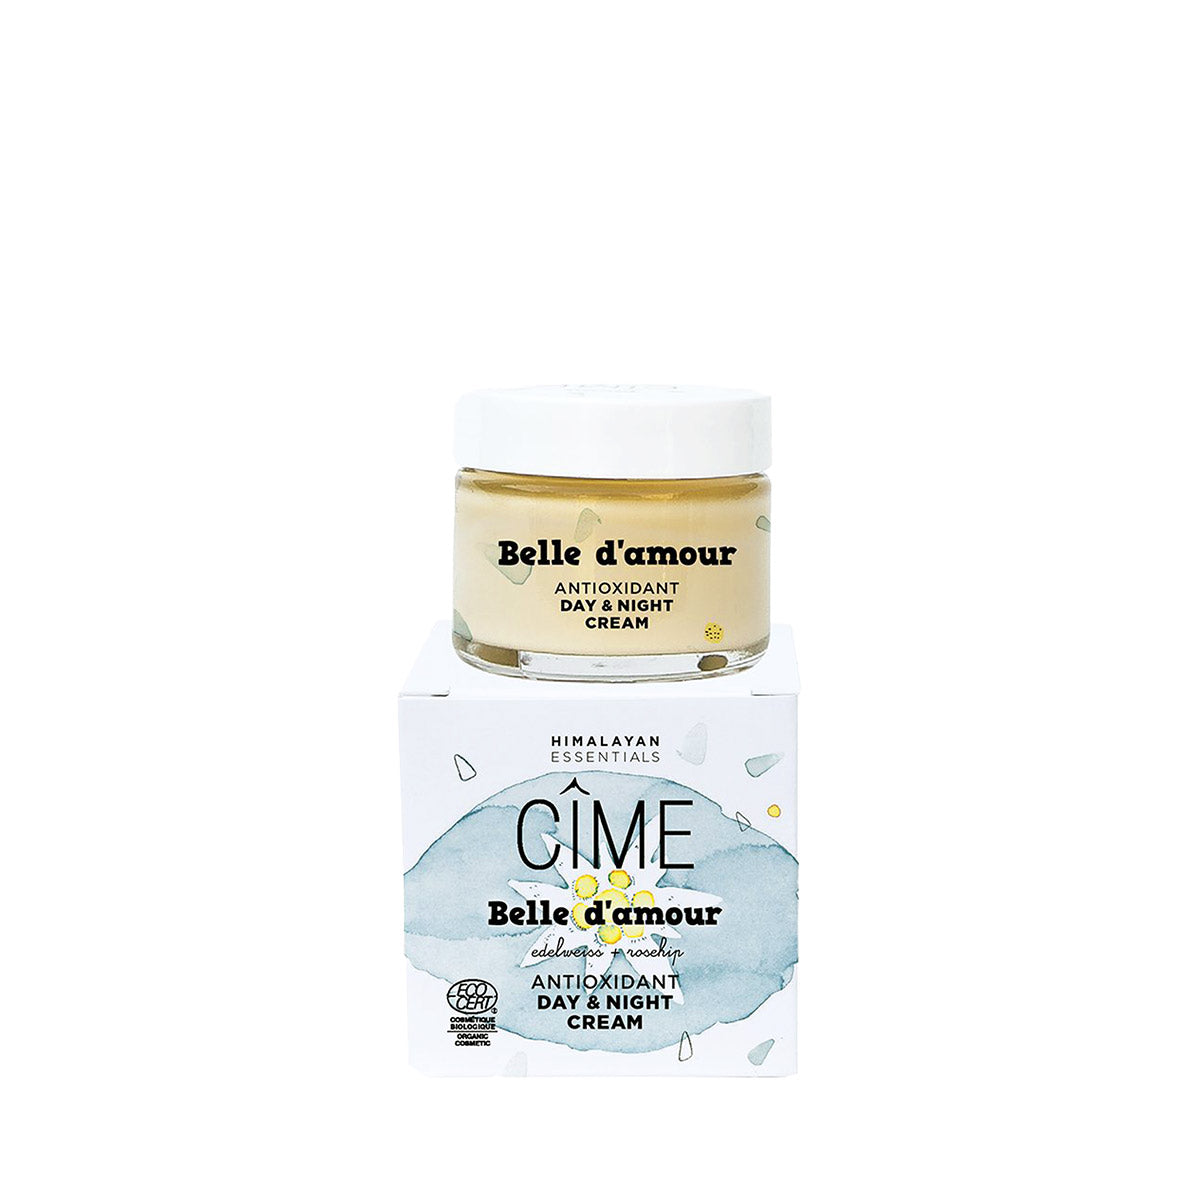 CIME Organic, natural antioxidant day and night cream made with Himalayan superfood ingredients edelweiss and wild rosehip protecting your face and neckline against UV, external stress, and premature aging.